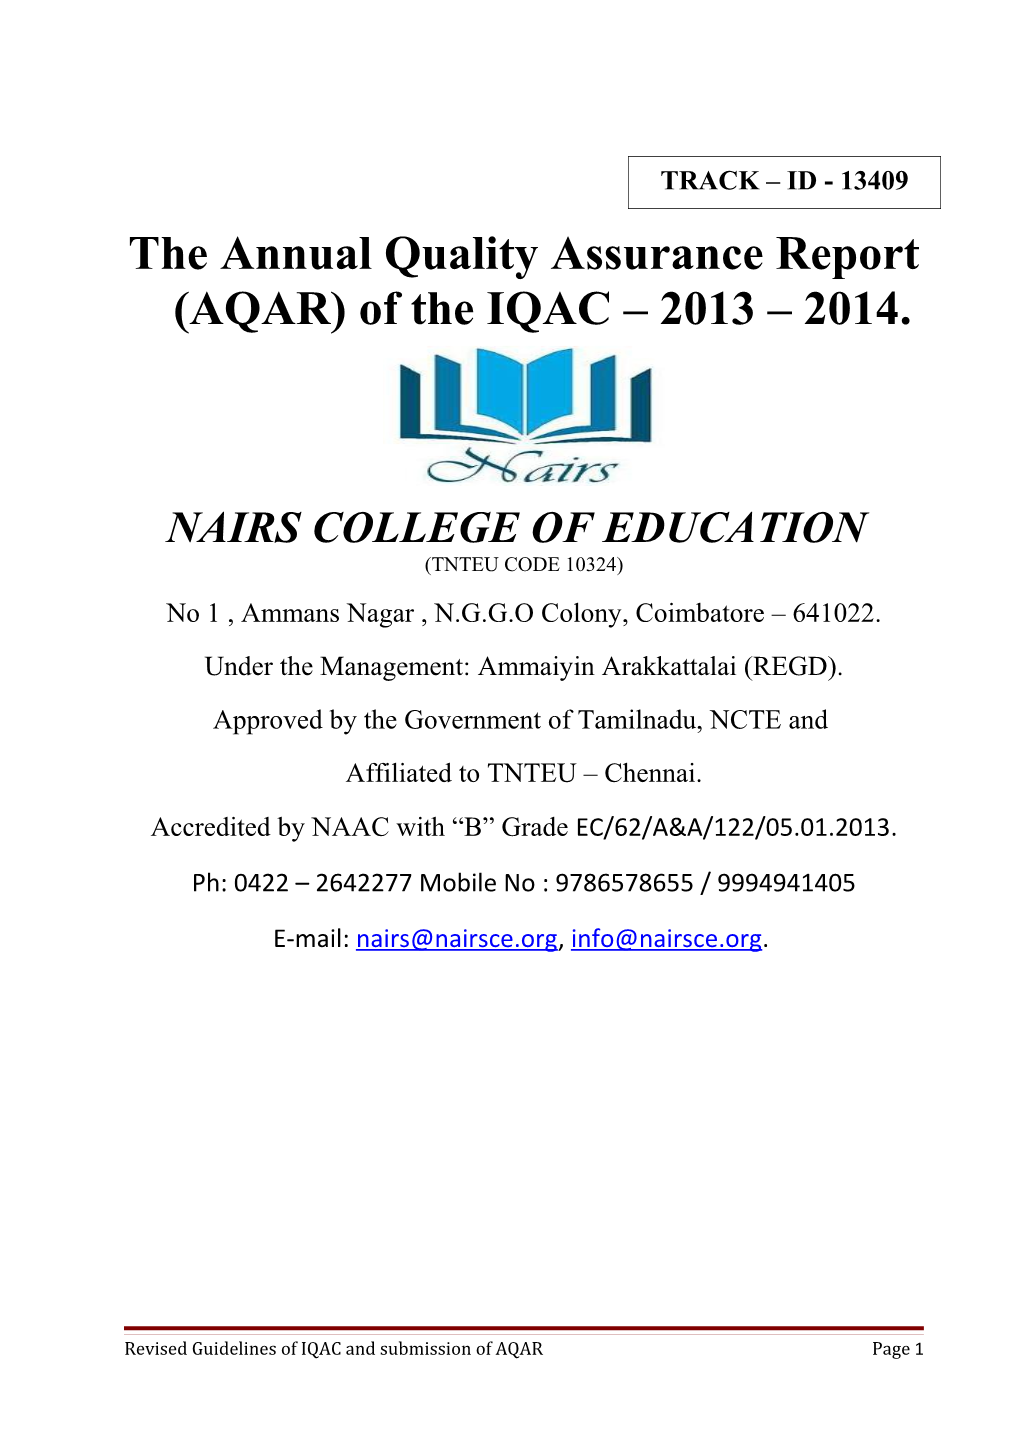 The Annual Quality Assurance Report (AQAR) of the IQAC 2013 2014